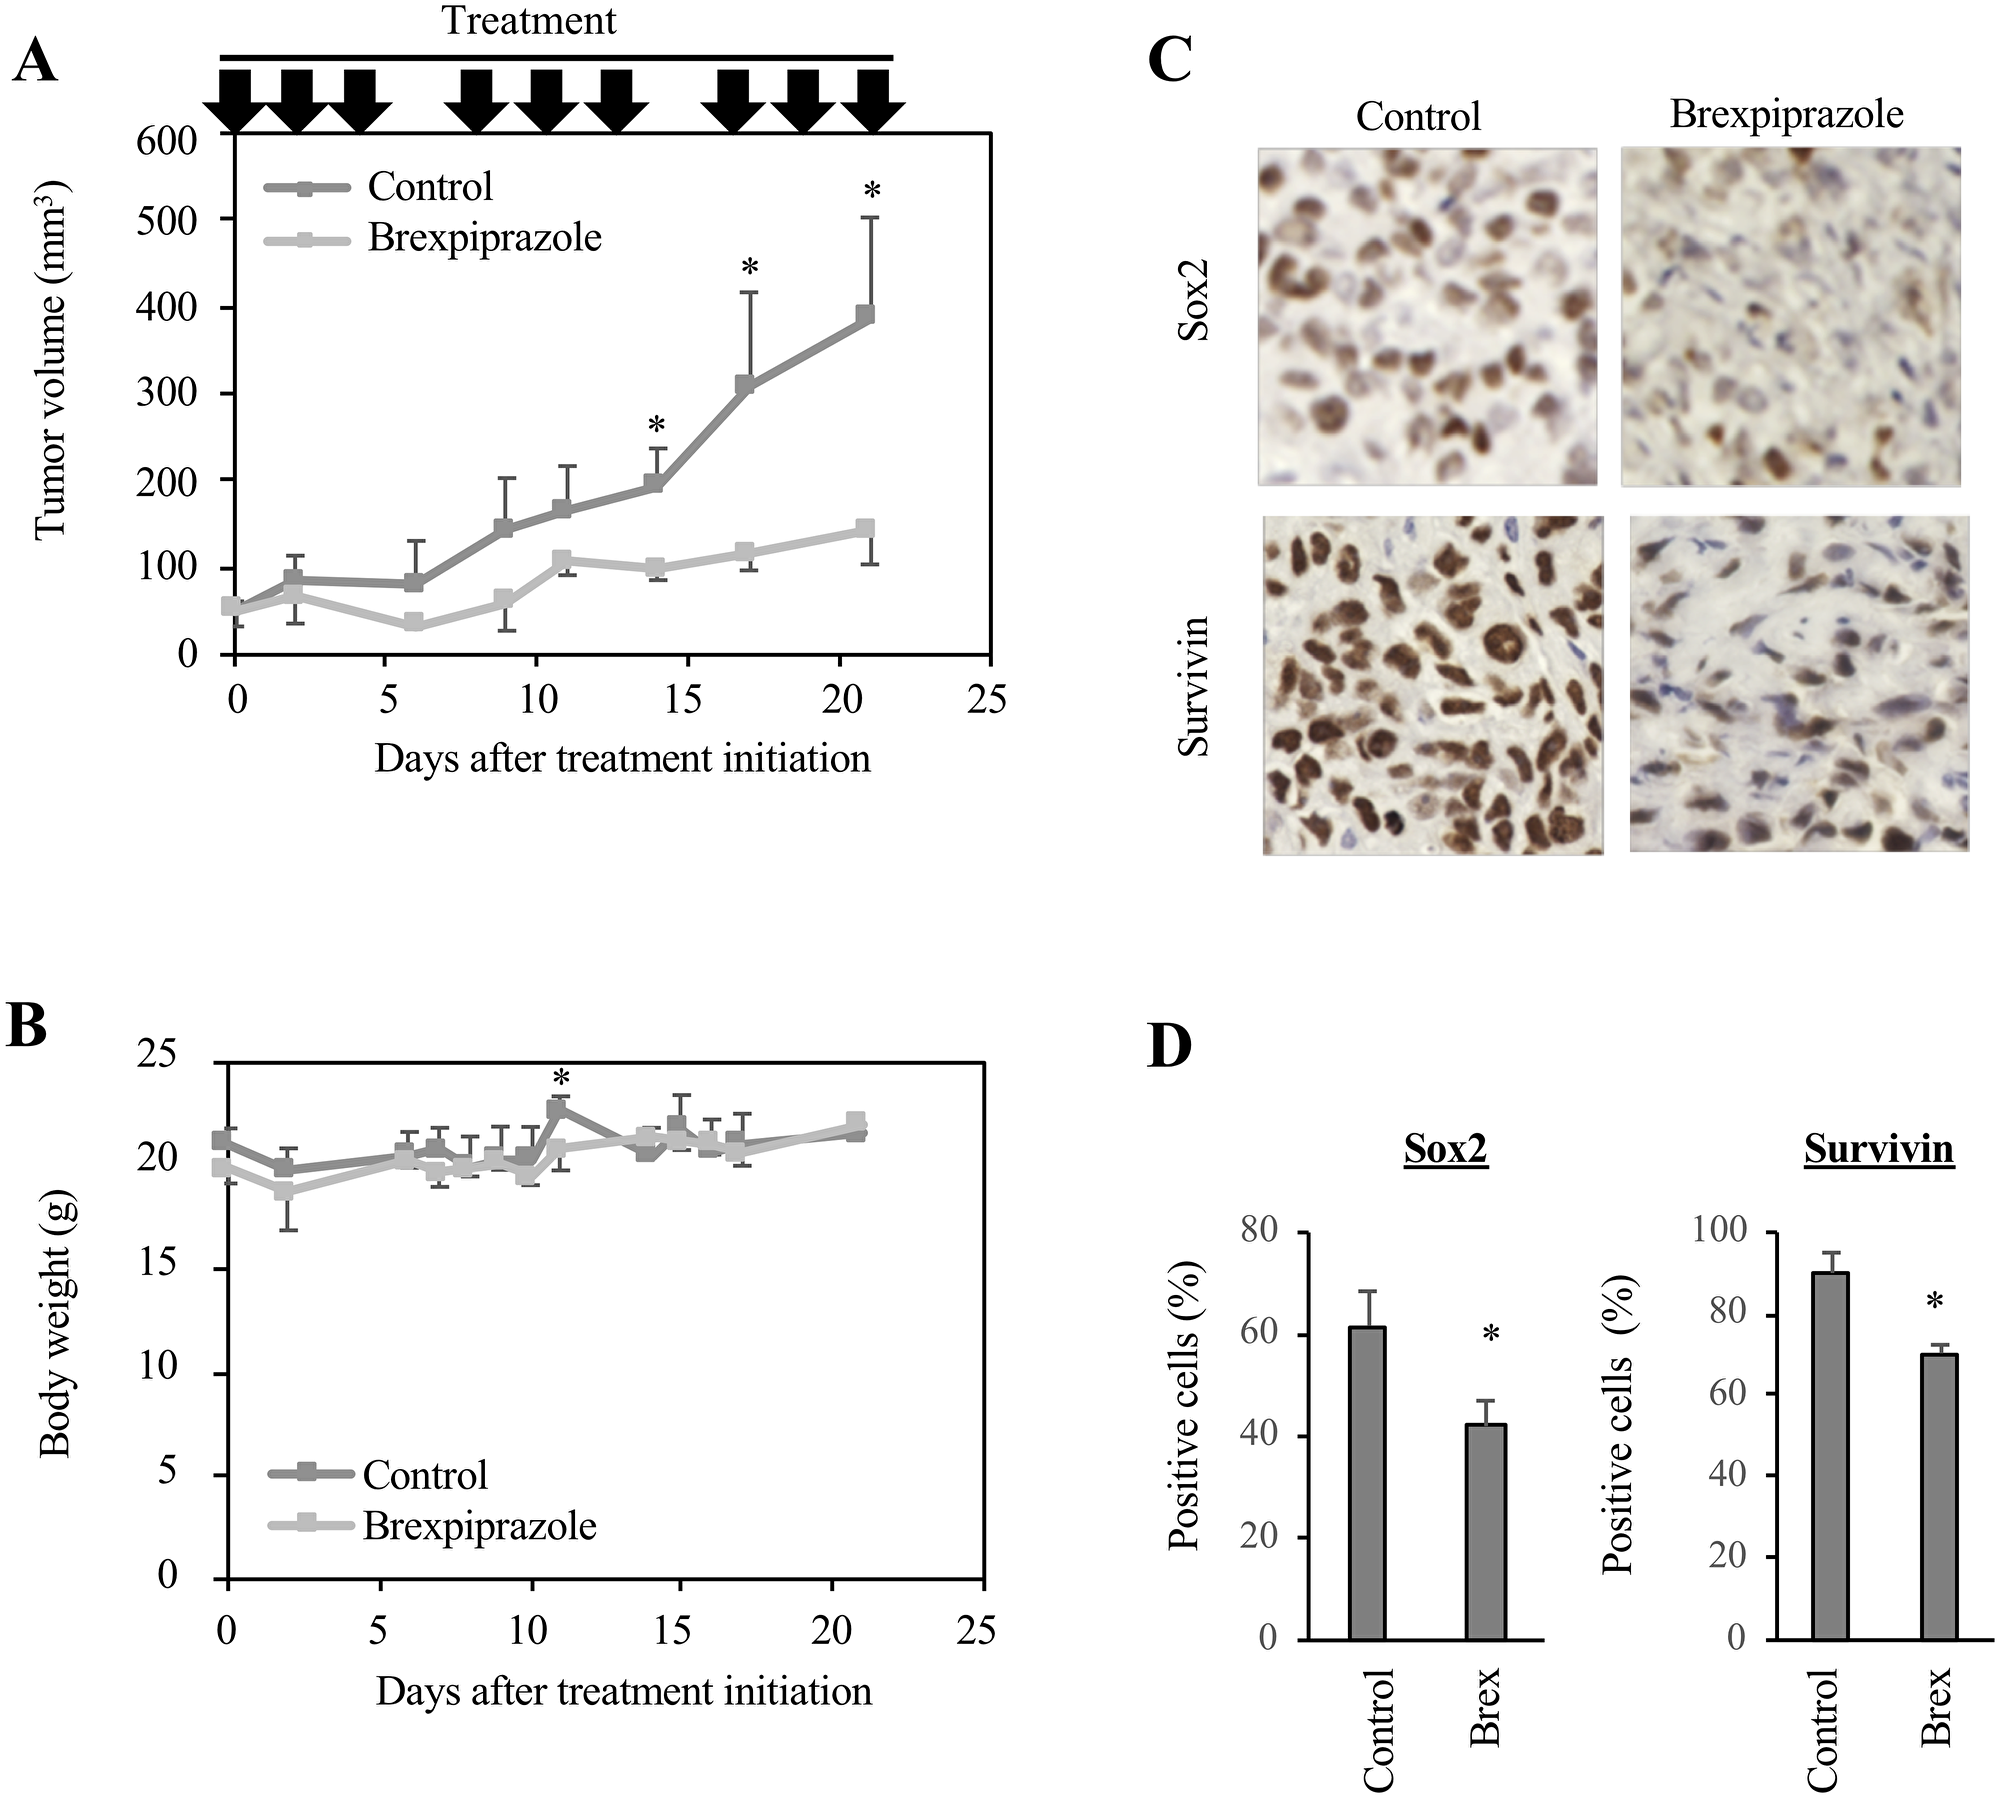 Brexpiprazole suppresses tumor growth in vivo and reduces the expression of Sox2 and survivin.